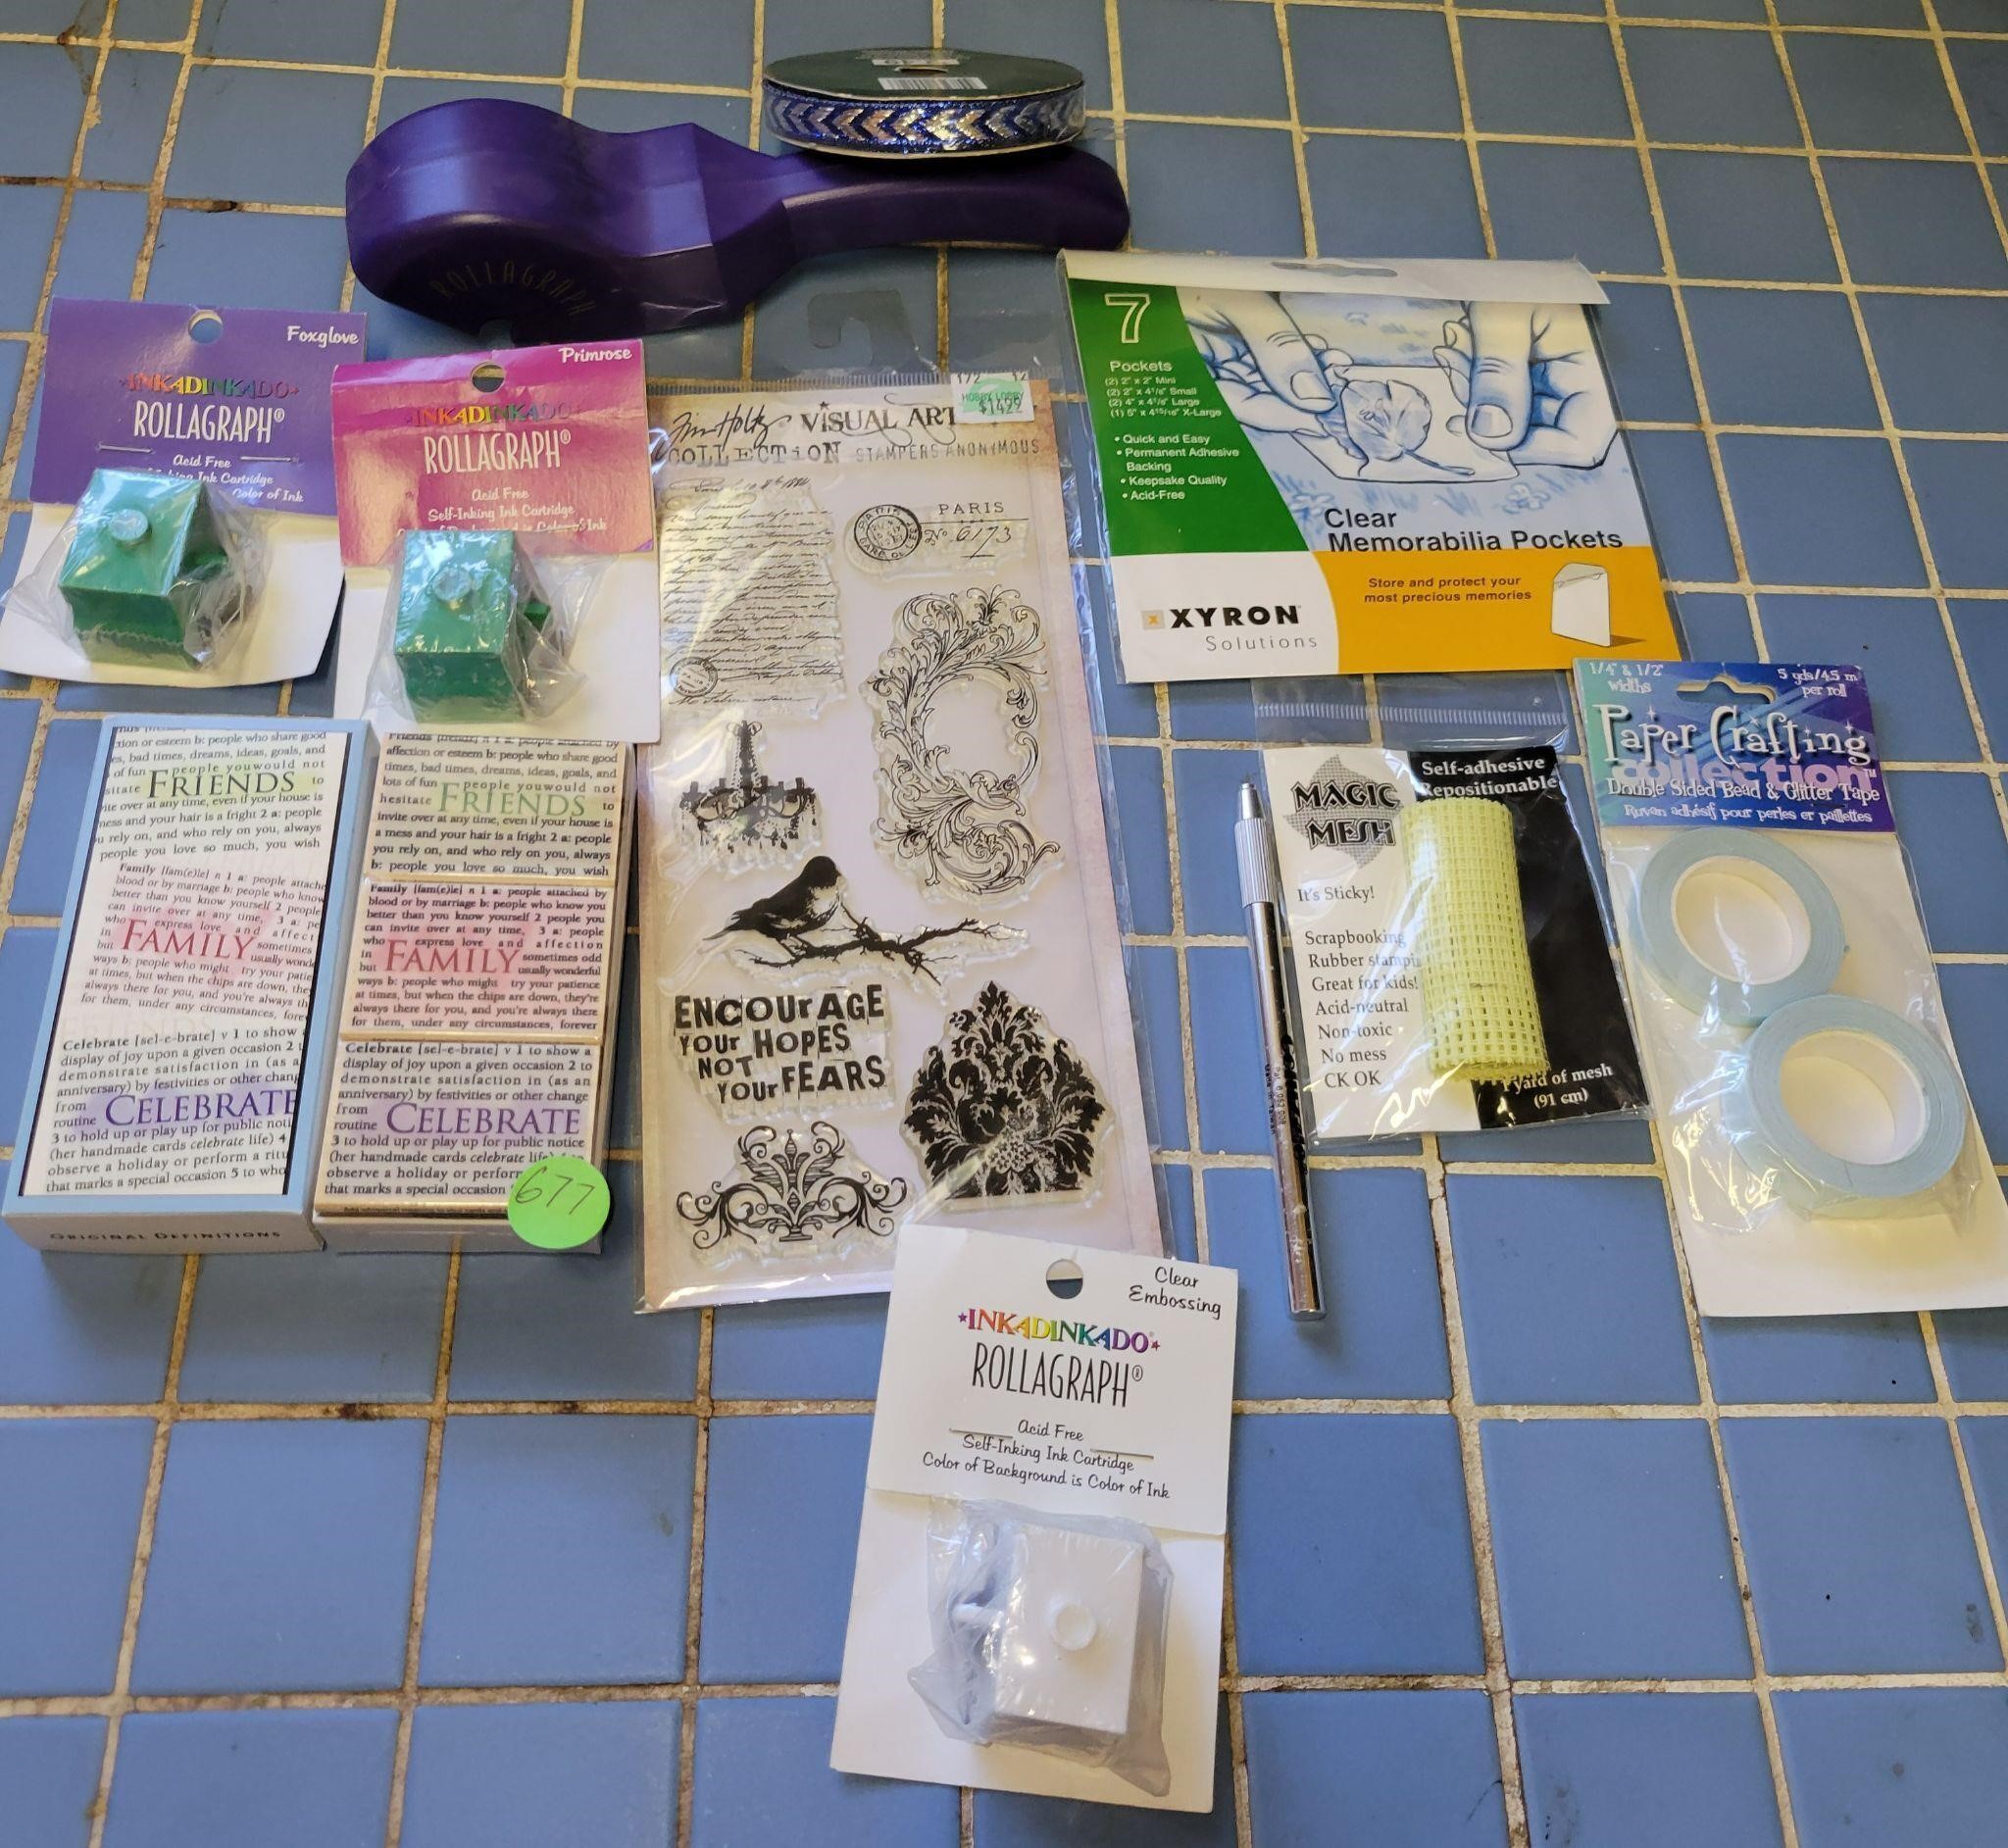 Stamps, Double sided Tape, Rollagraphs, Ribbon